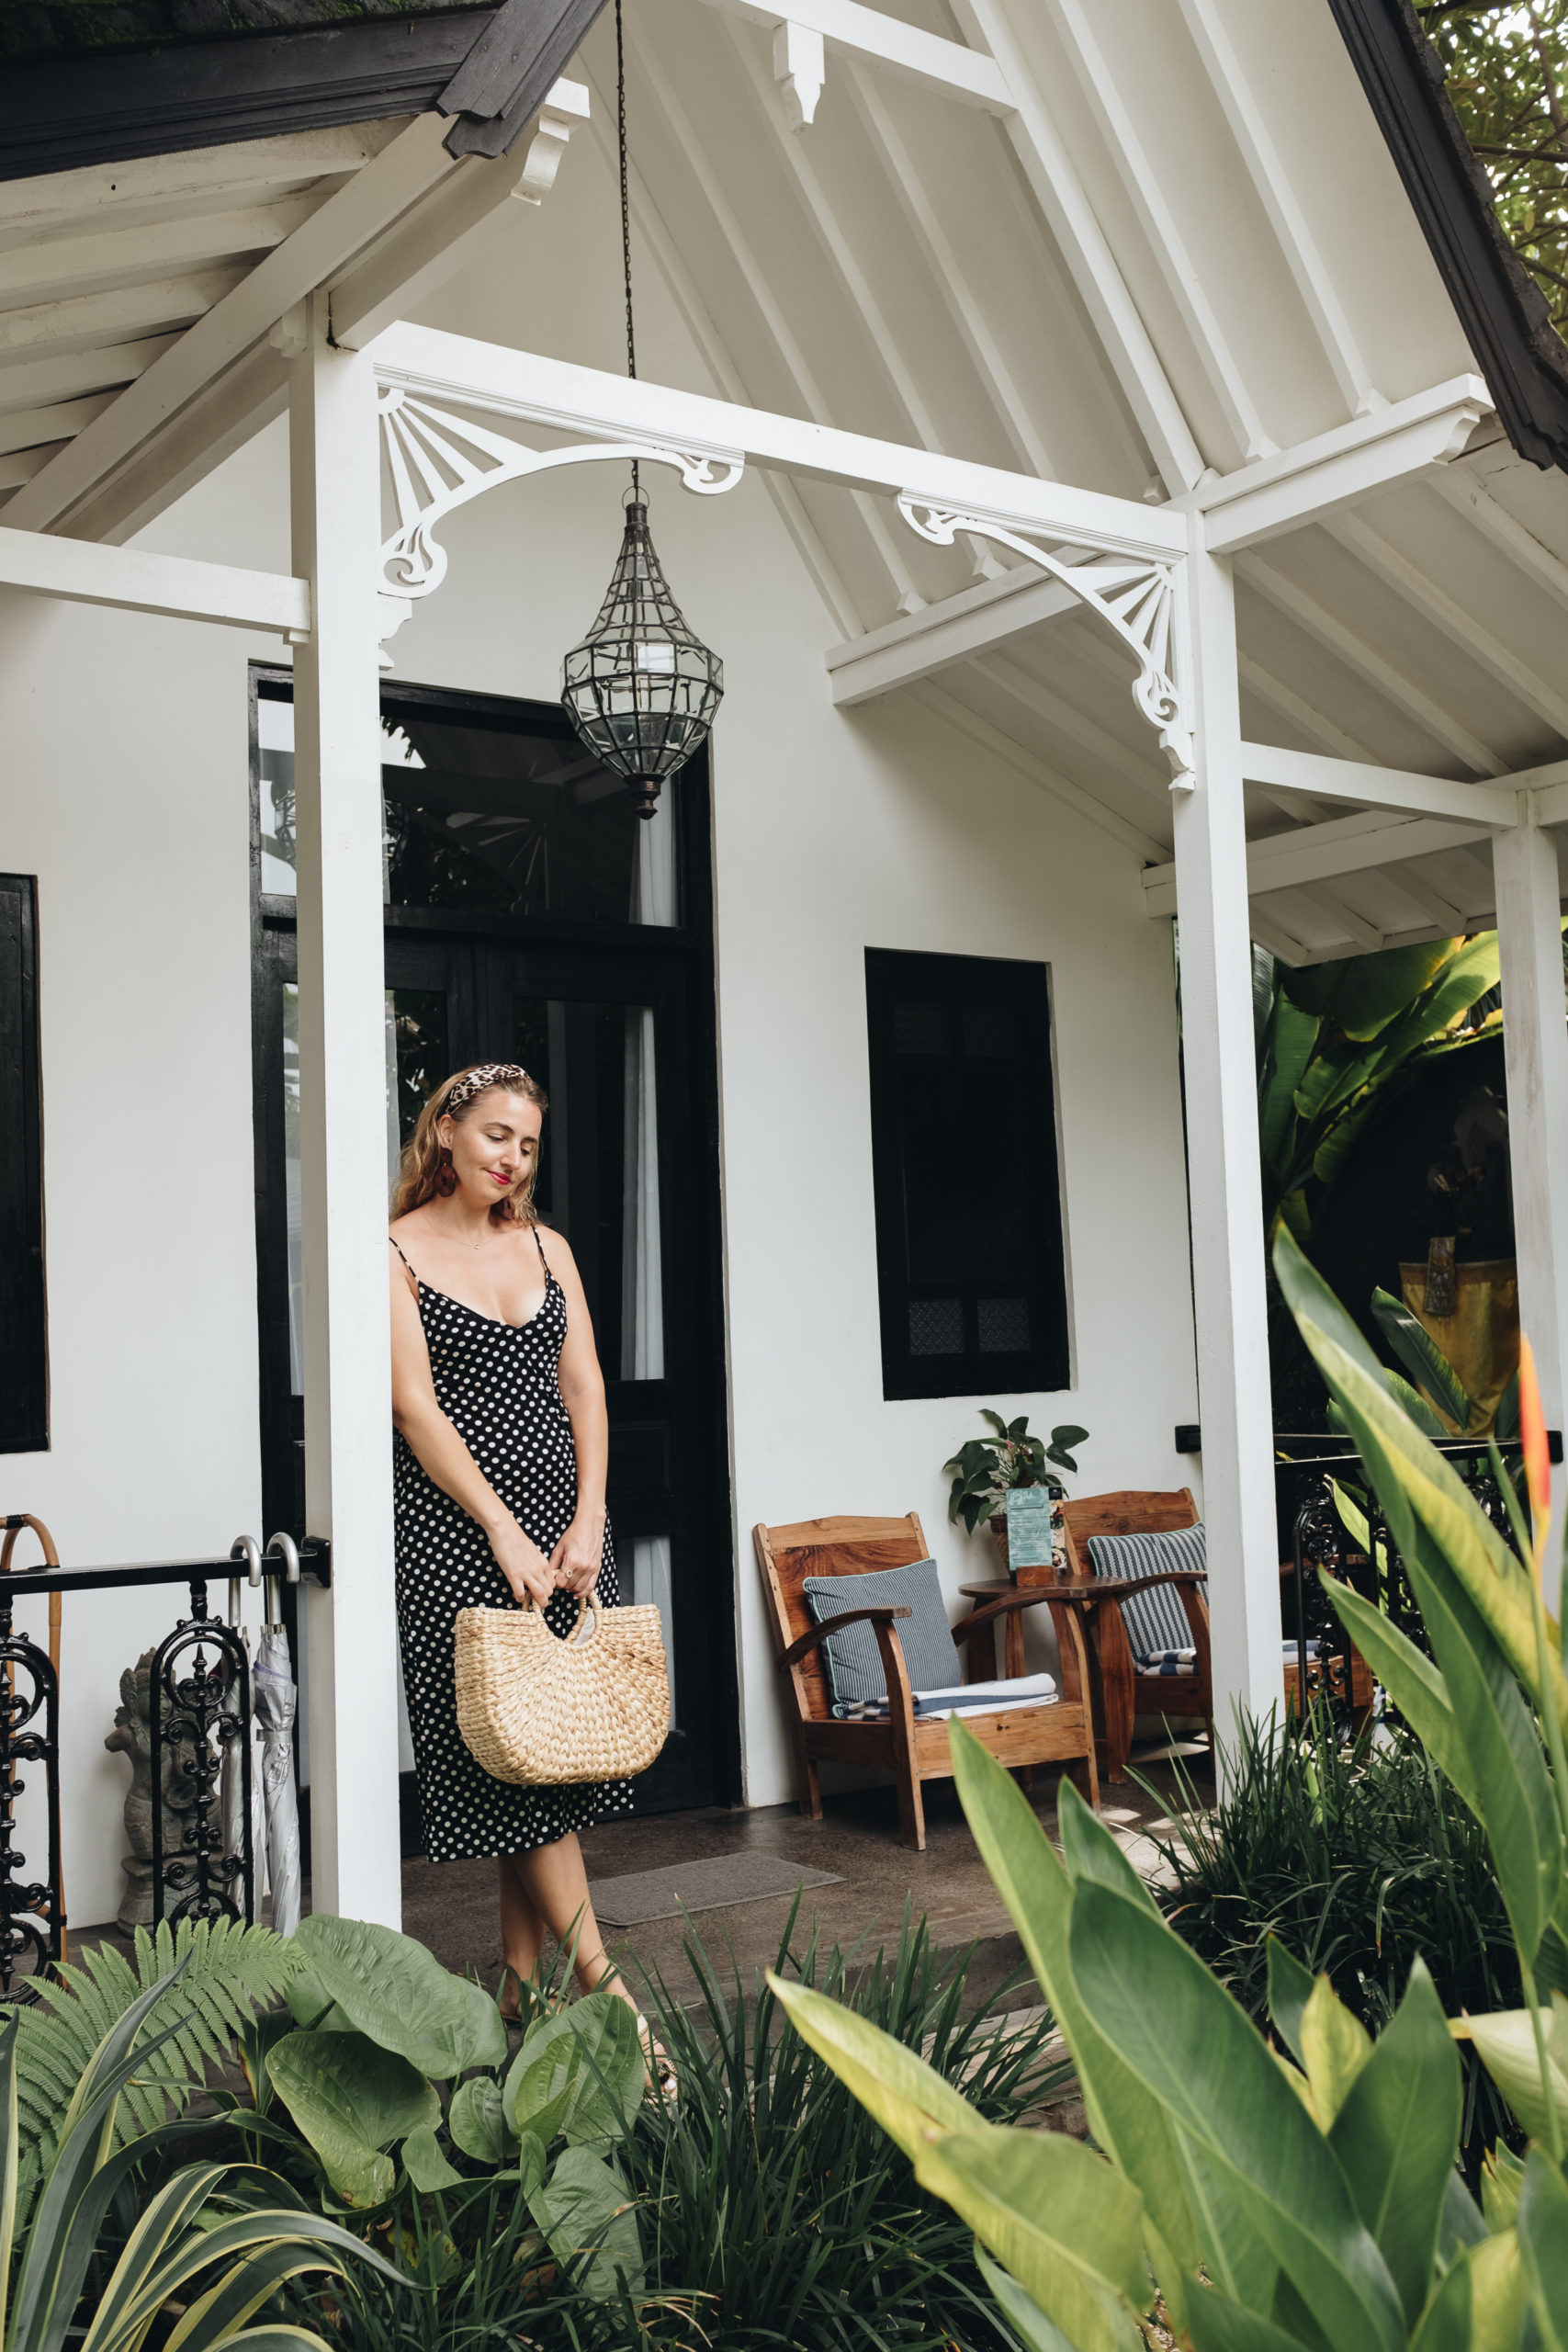 Solo female travel to Bali 39 - THE VIENNESE GIRL